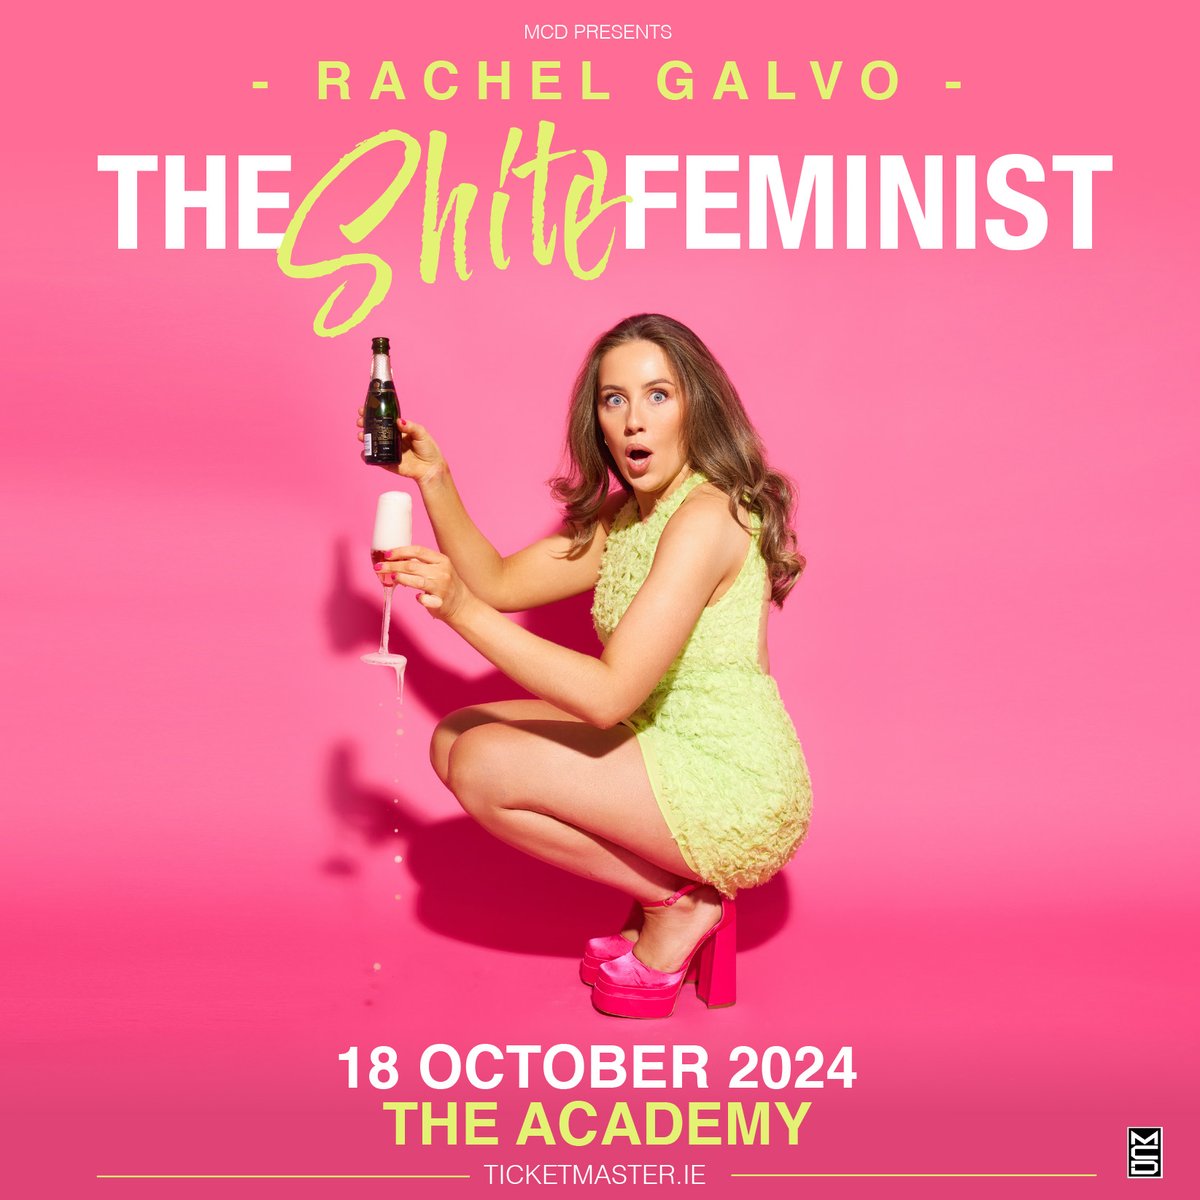 𝙉𝙀𝙒 𝘿𝘼𝙏𝙀 𝘼𝘿𝘿𝙀𝘿💝 After selling out her upcoming Dublin show within minutes, Rachel Galvo is excited to bring her show 'The Shite Feminist' to The Academy on October 18th. Tickets will go on sale this Friday at 9am.